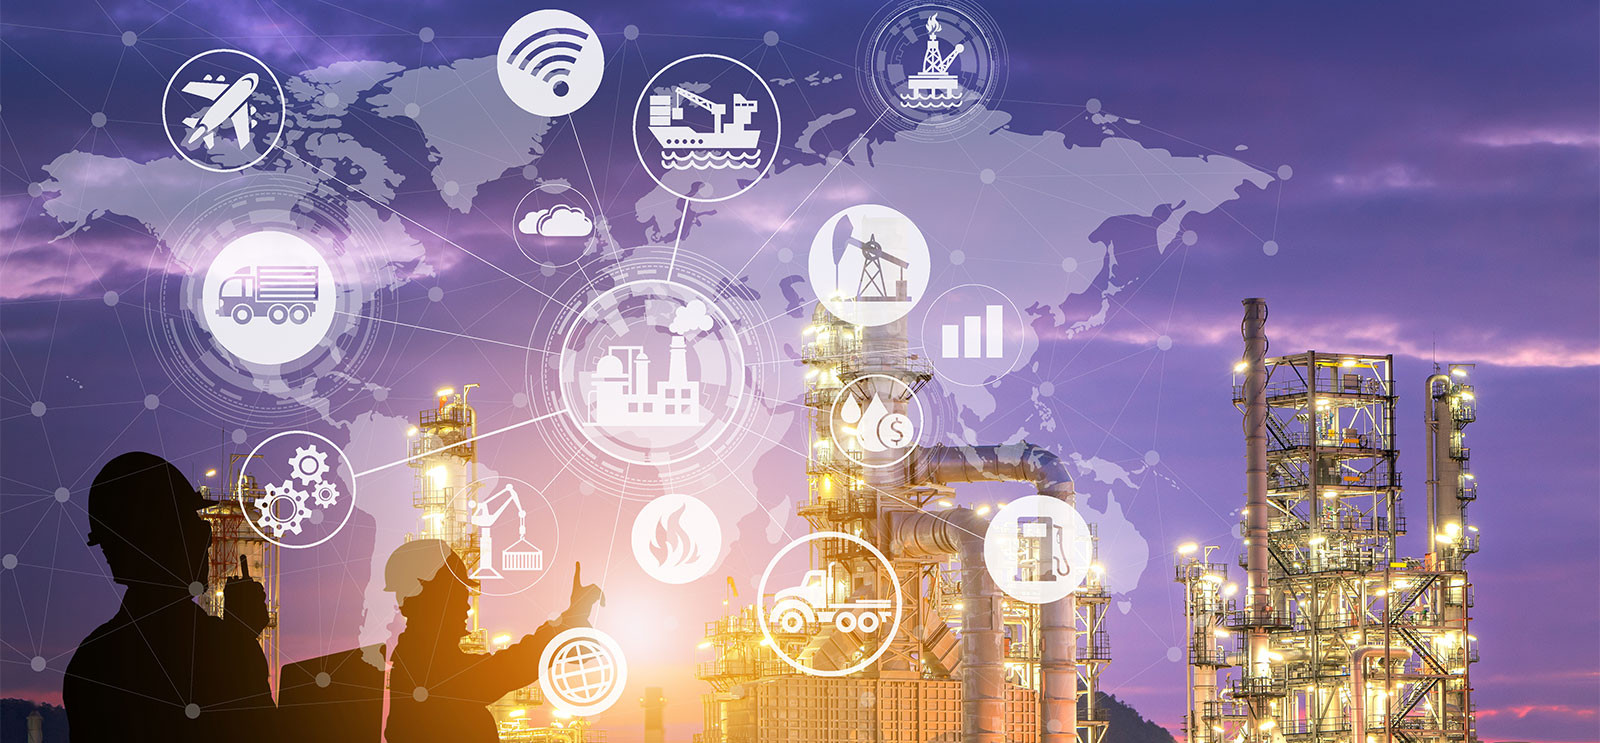 Double exposure physical system icon with Oil and gas refinery plant background and silhouette of engineering team is working as concept of industry 4.0